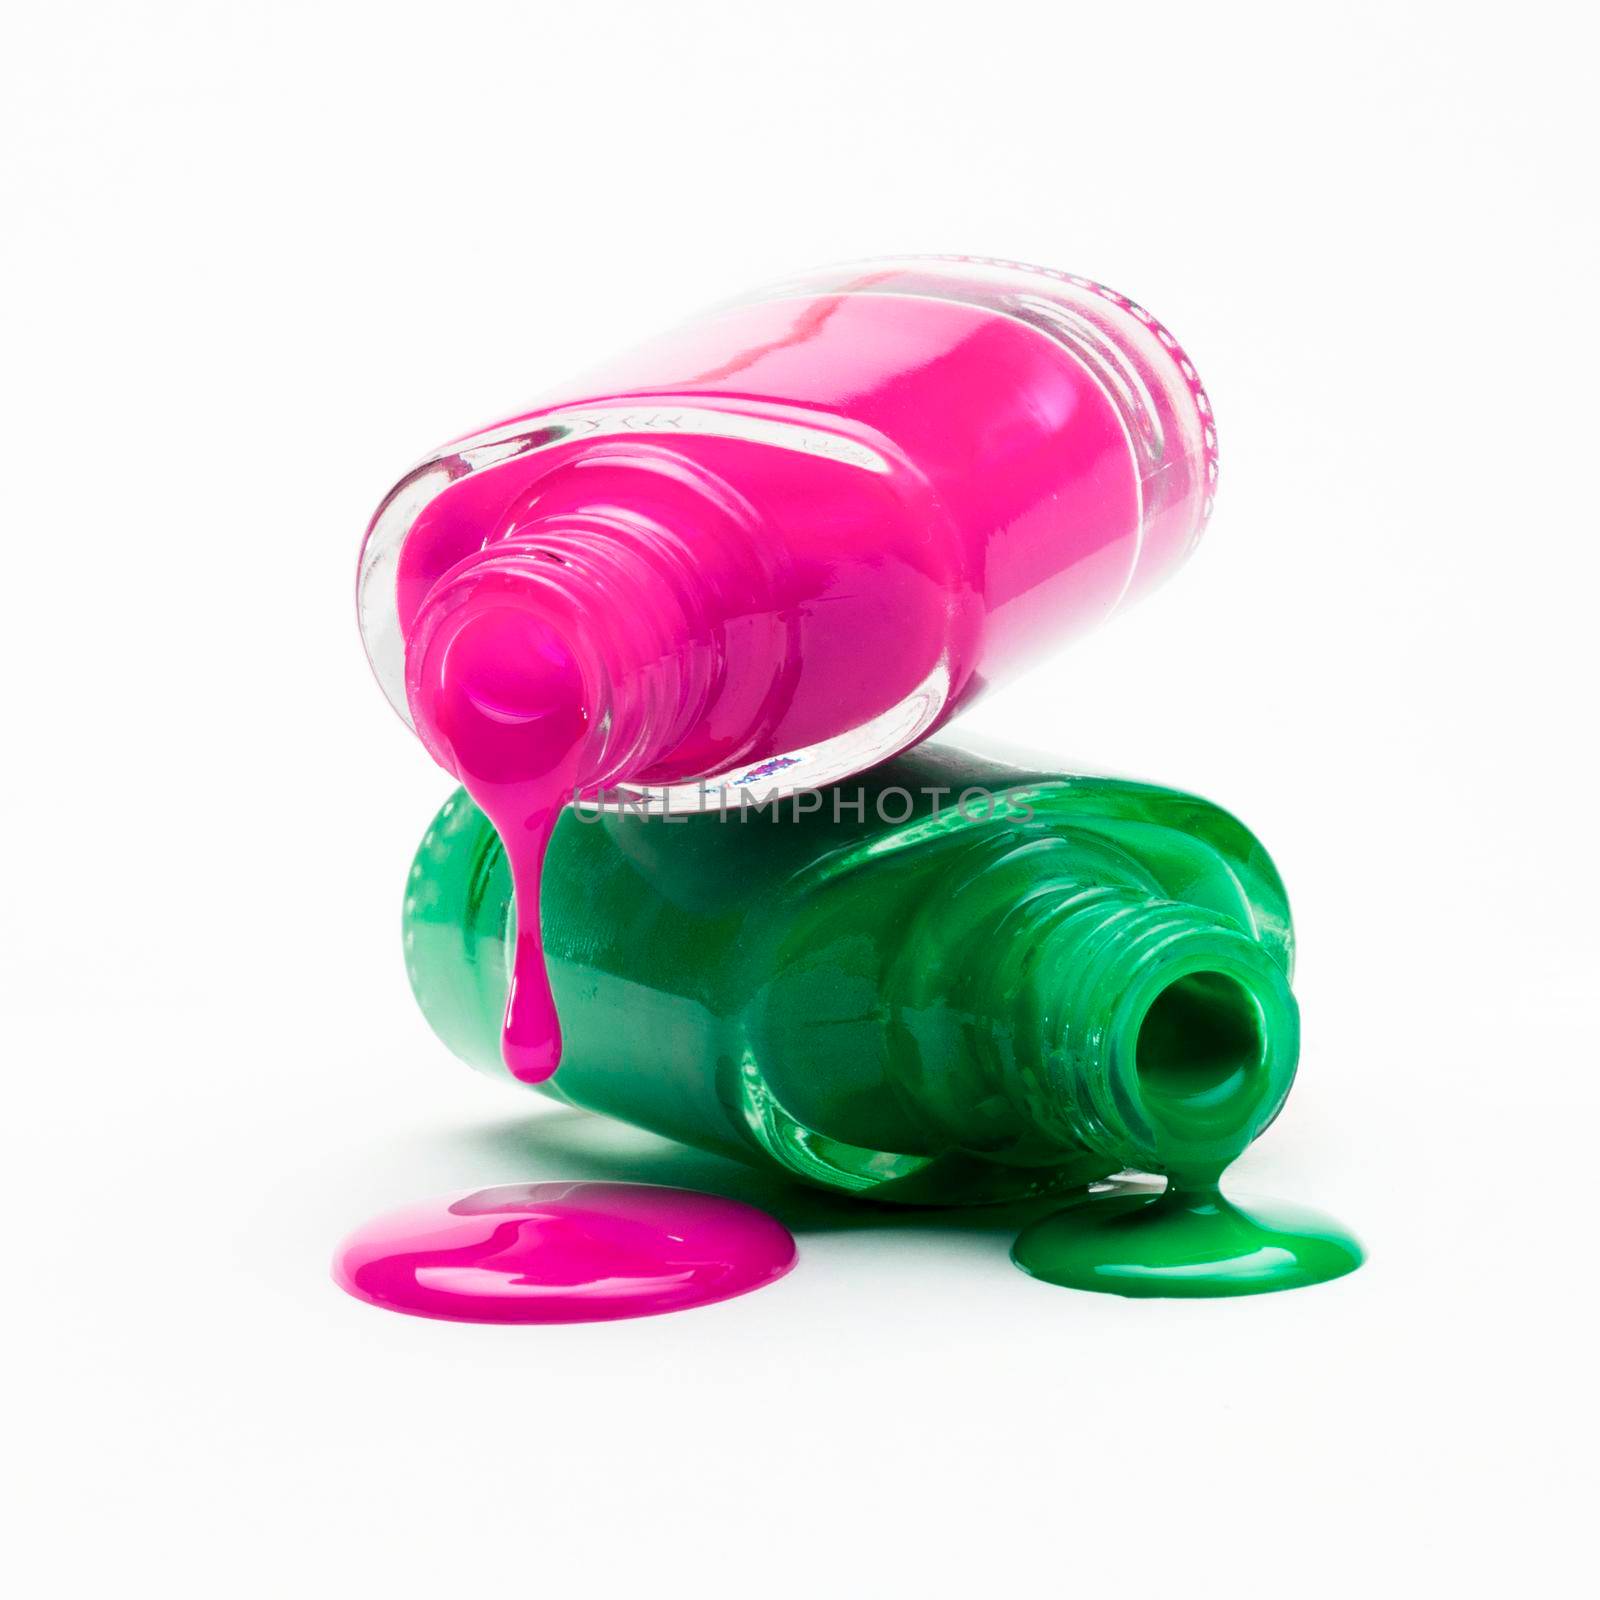 close up pink green nail polish dripping from bottle by Zahard